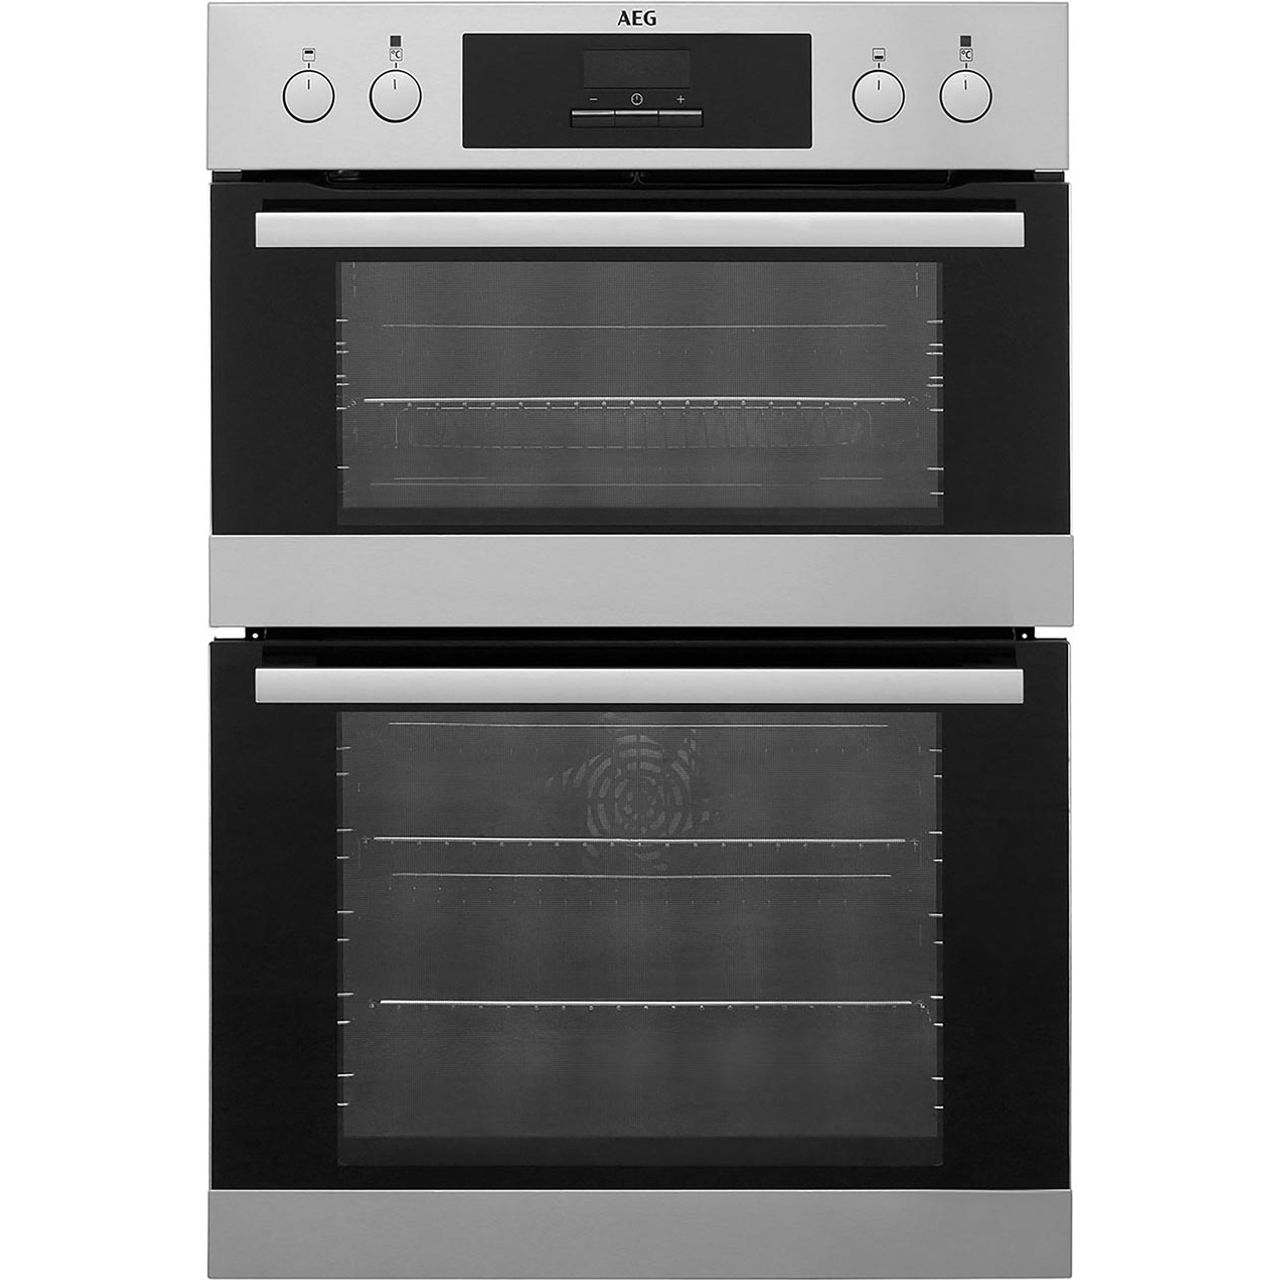 AEG DCB331010M Built In Double Oven Review